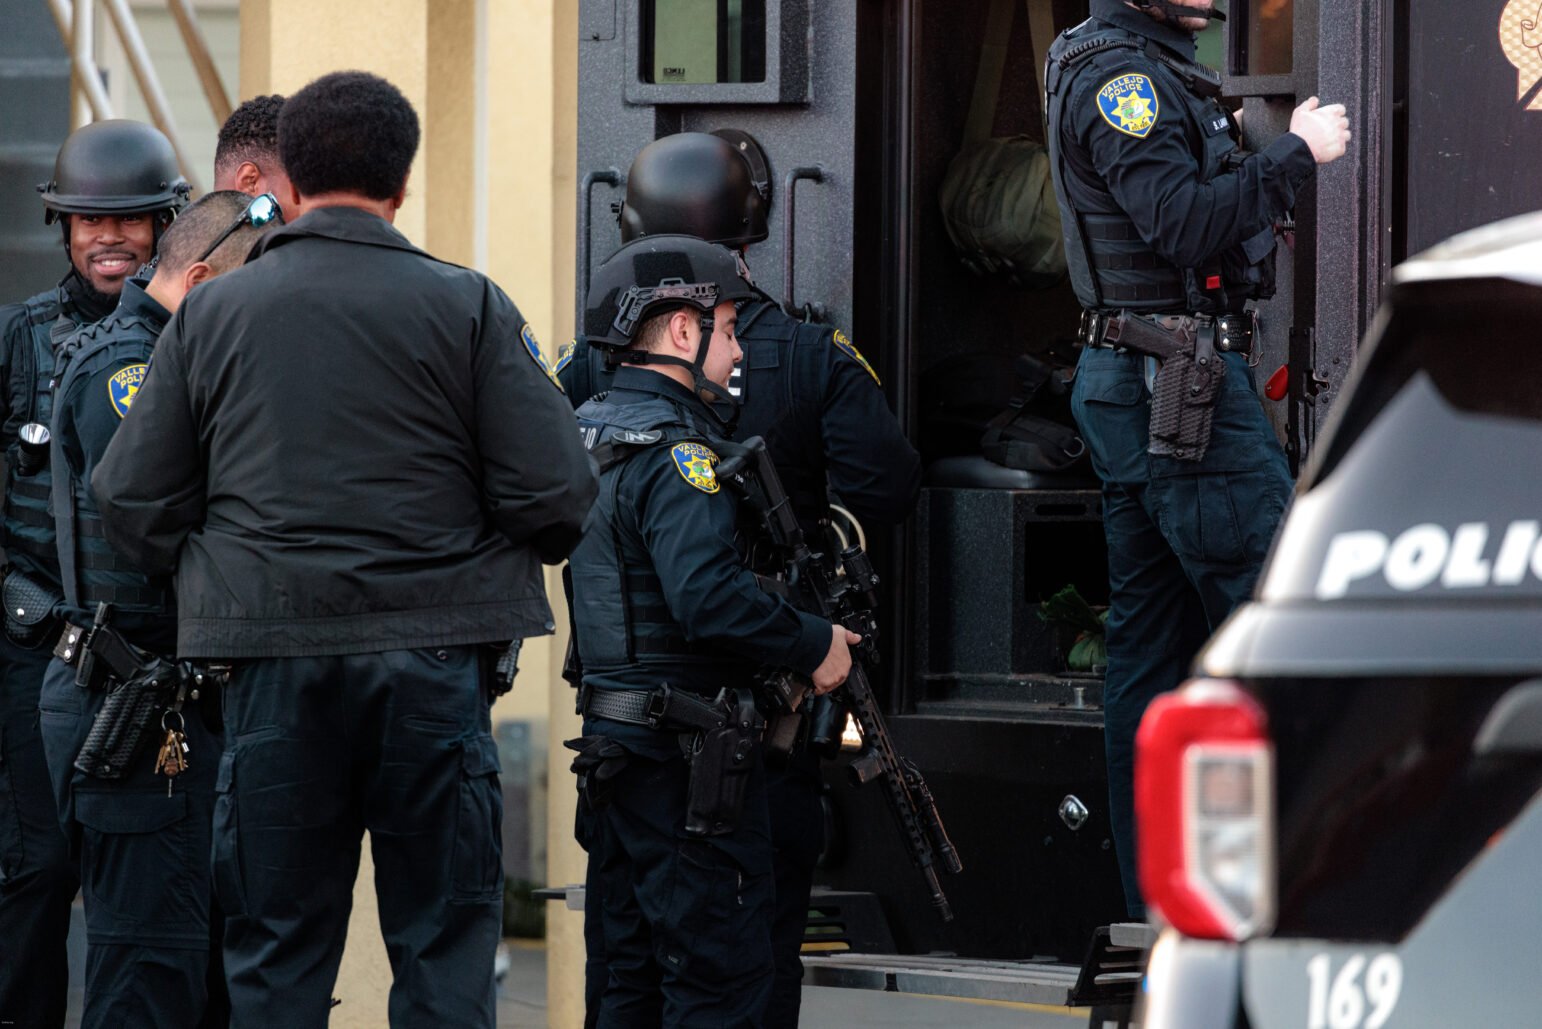 A group of law enforcement officers in tactical gear is gathered around the entrance of a vehicle, possibly preparing for a tactical operation. The officers are wearing helmets, bulletproof vests, and carrying firearms. One officer is looking towards the camera and smiling, amidst a serious and focused setting. This officer is identified as Ofc. Ronald Dupree from the Vallejo Police Department. There is a marked police vehicle in the foreground.